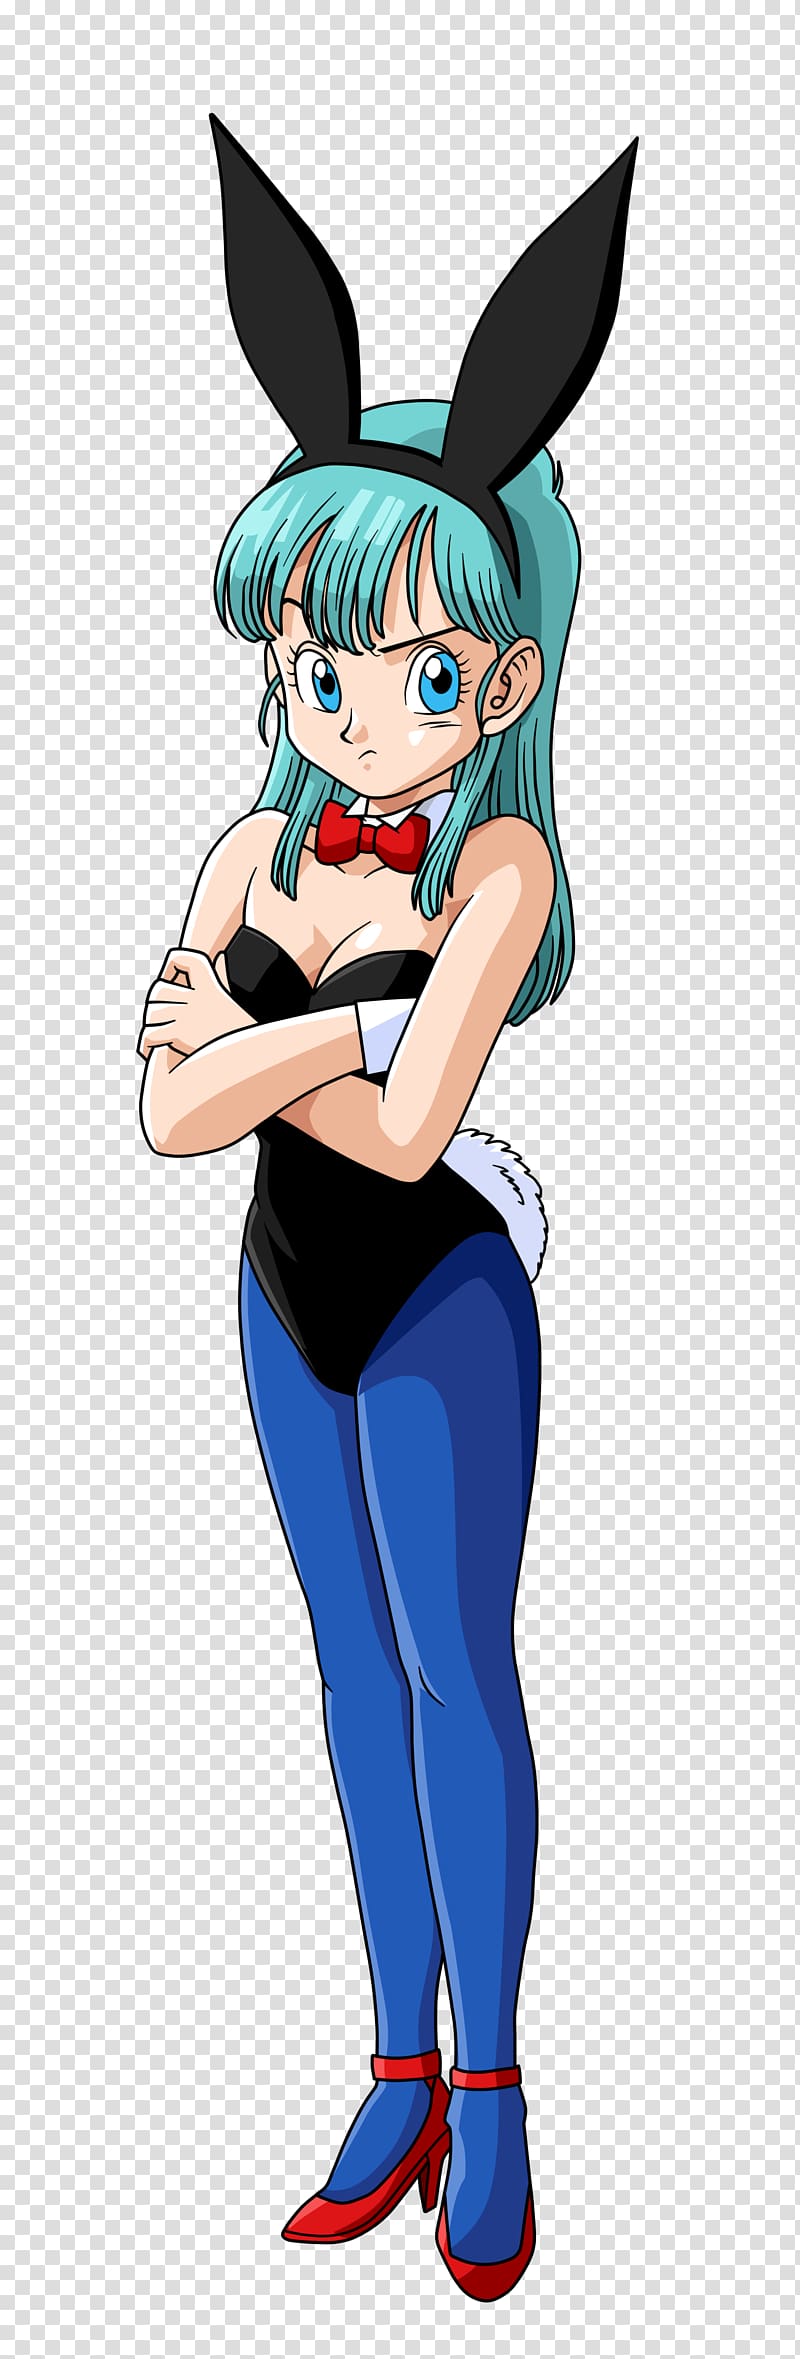 Bulma Android 18 Vegeta Dragon Ball Cosplay, bunny transparent background PNG clipart